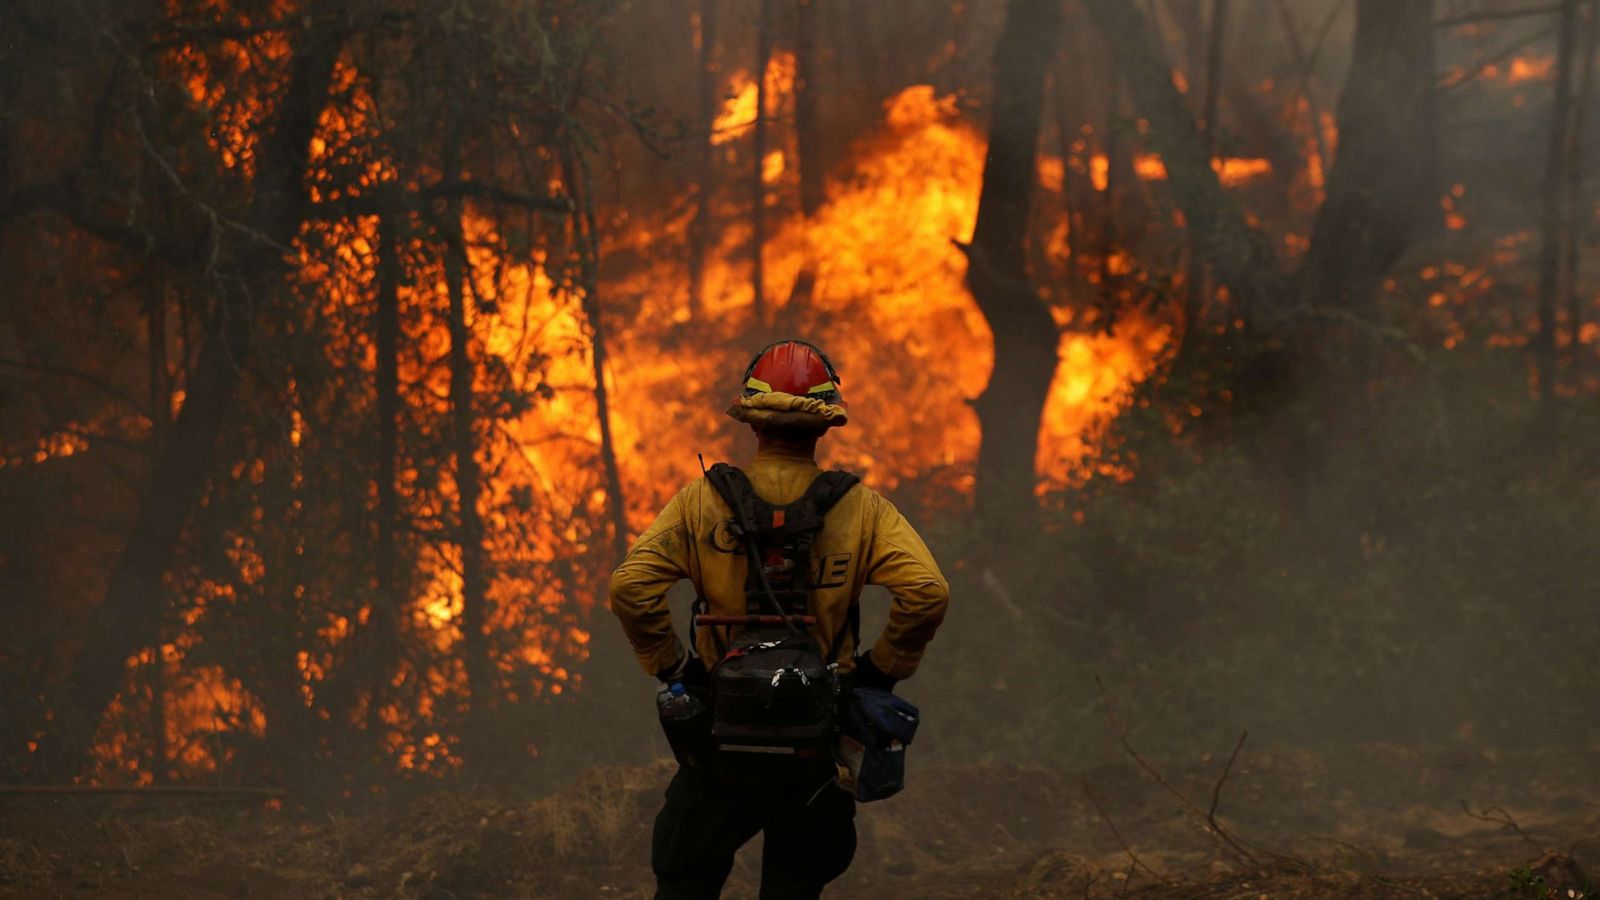 Image of Forest fire with firefighters